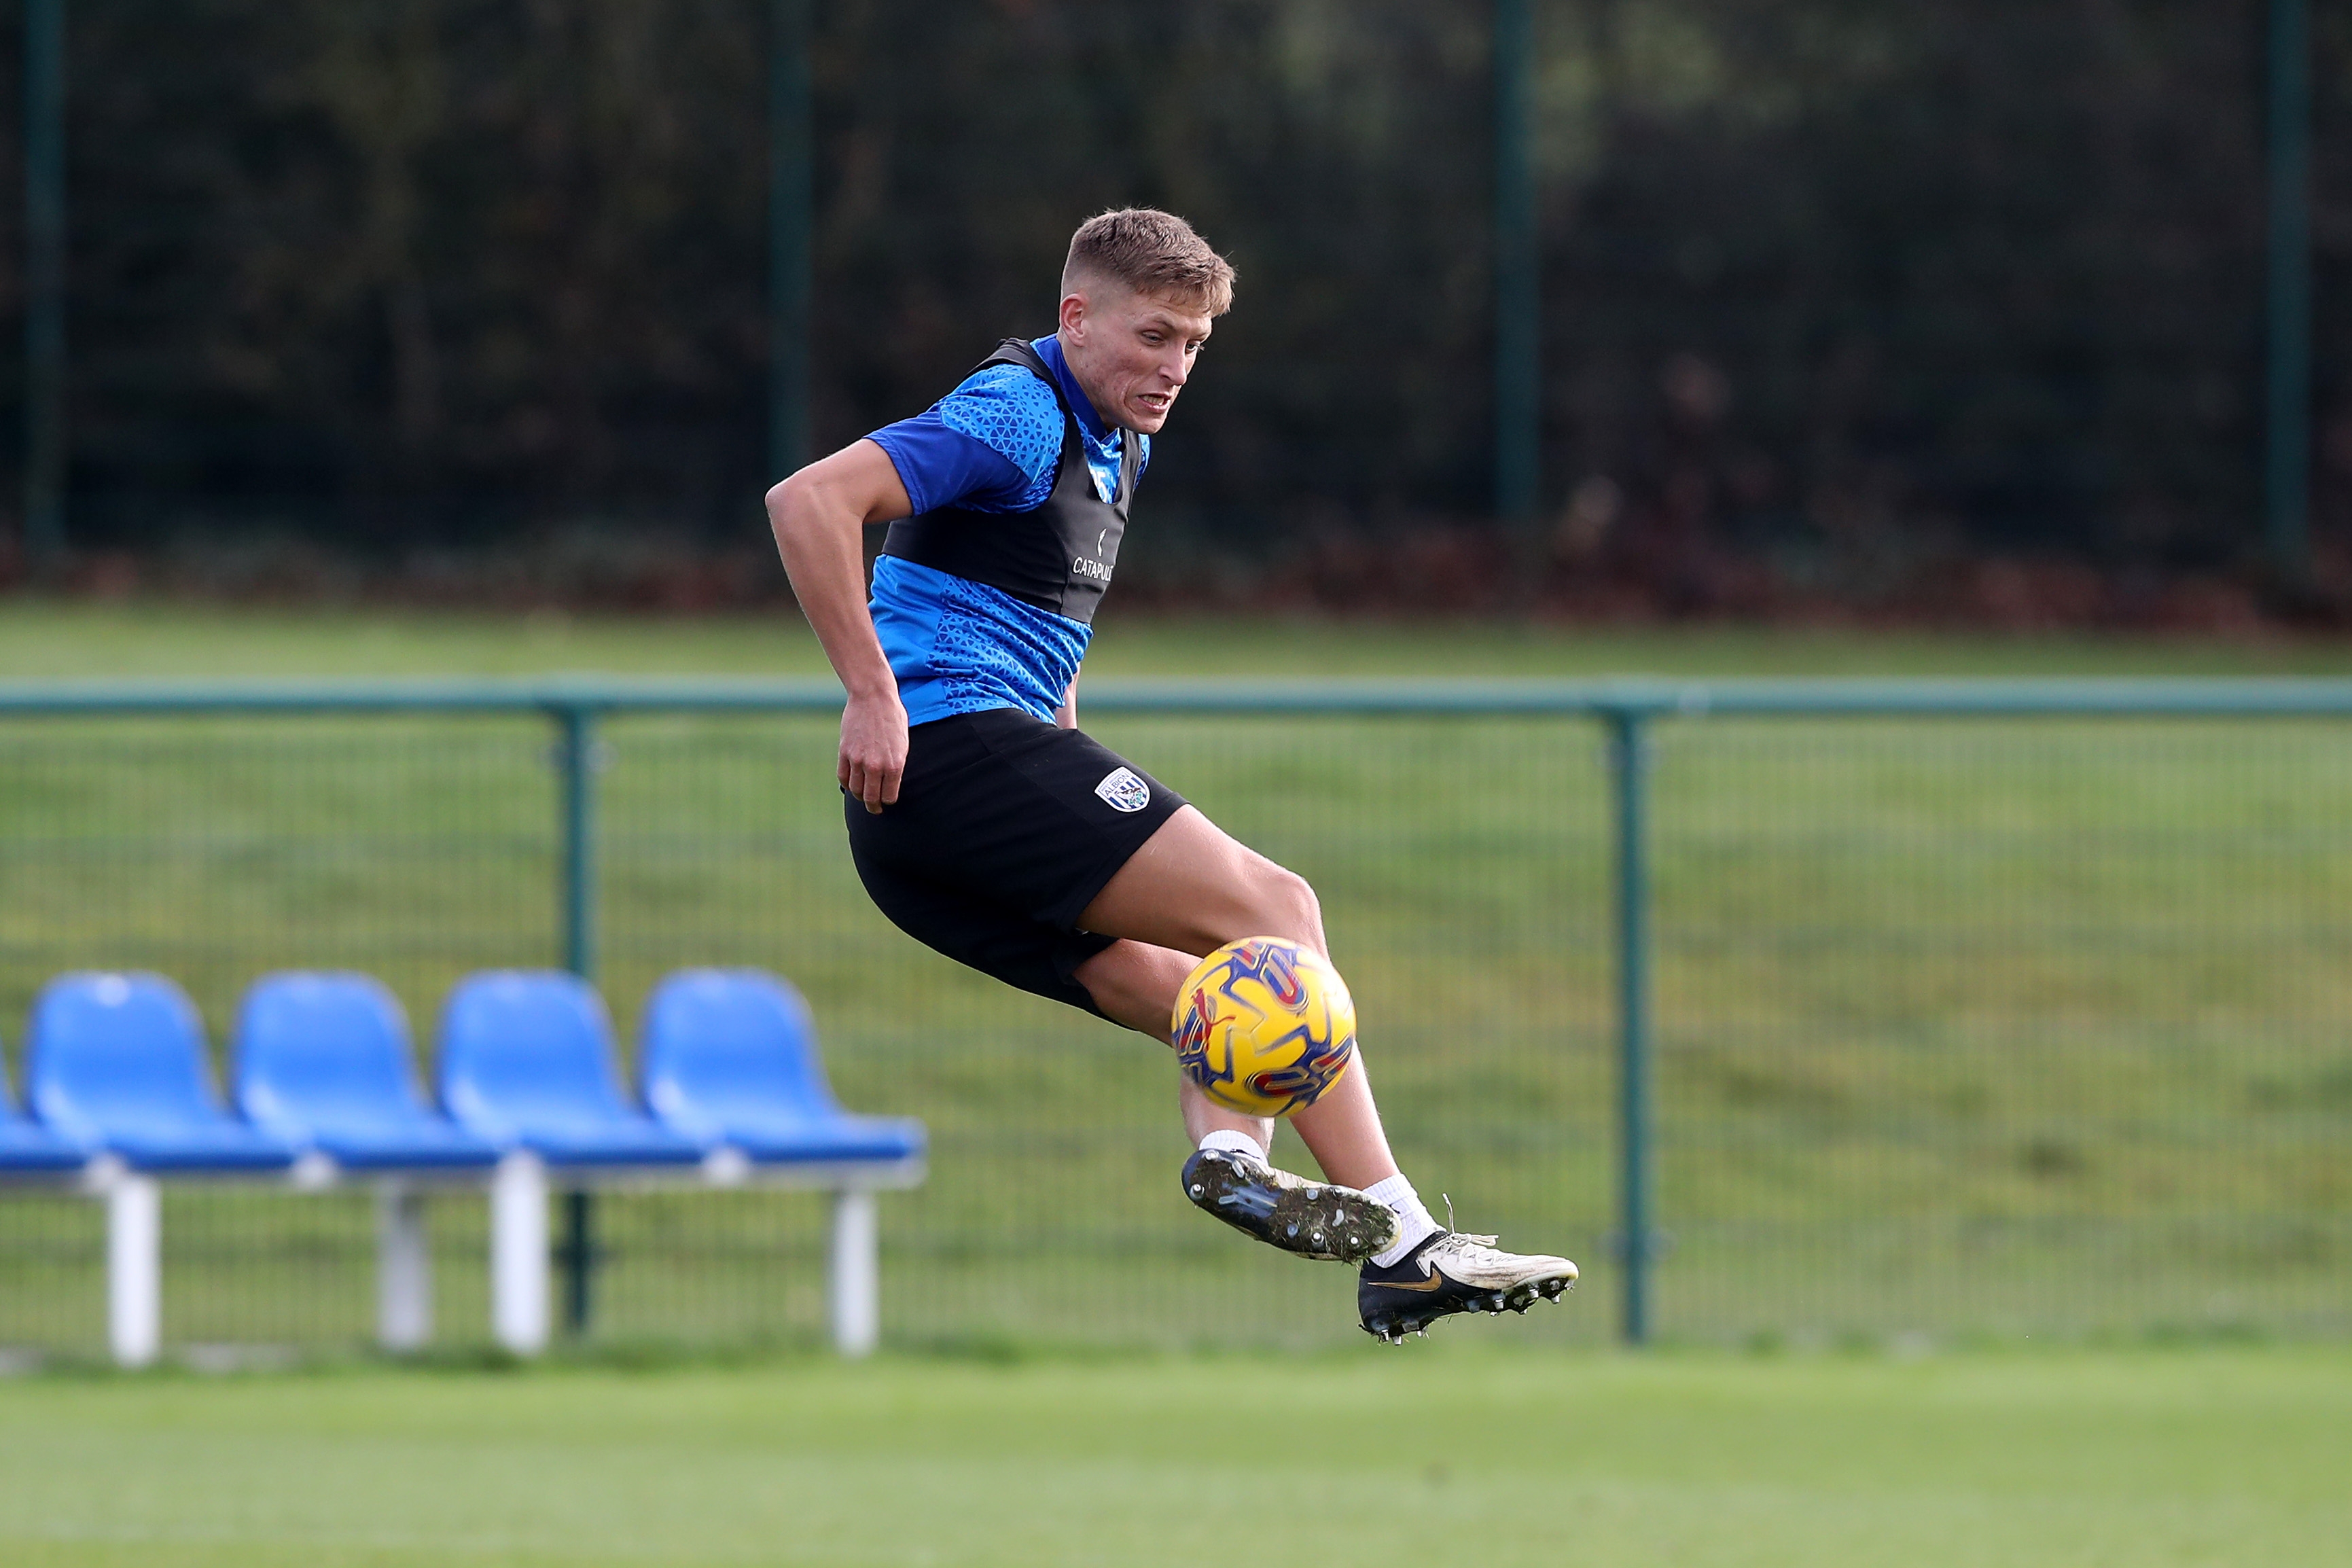 Callum Marshall controlling the ball during a training session